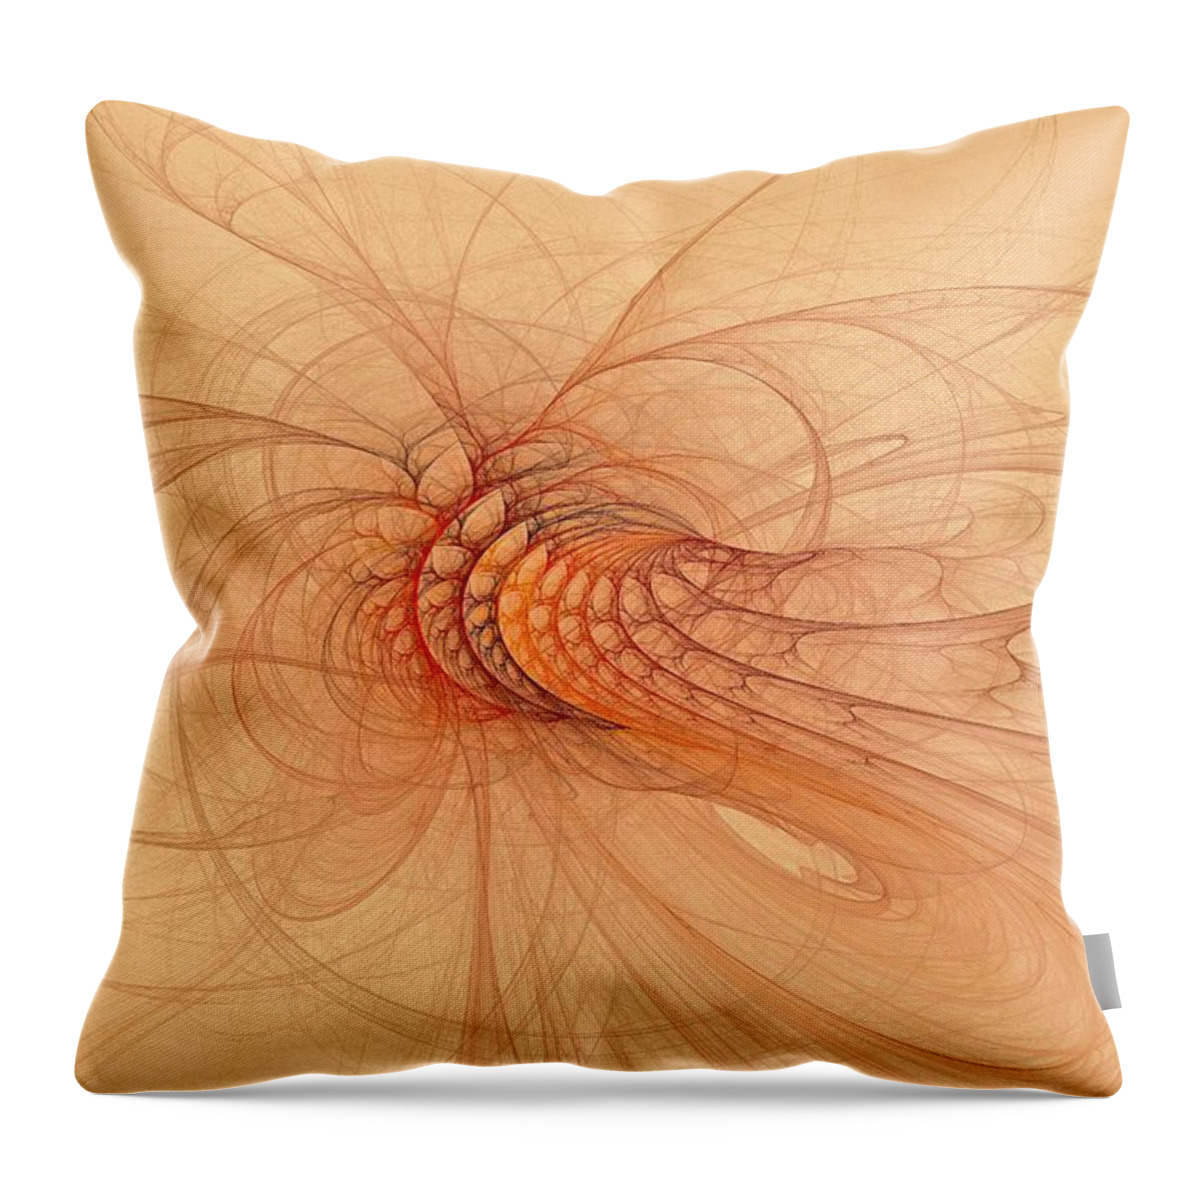  Throw Pillow featuring the digital art Structure of Light-3 by Doug Morgan